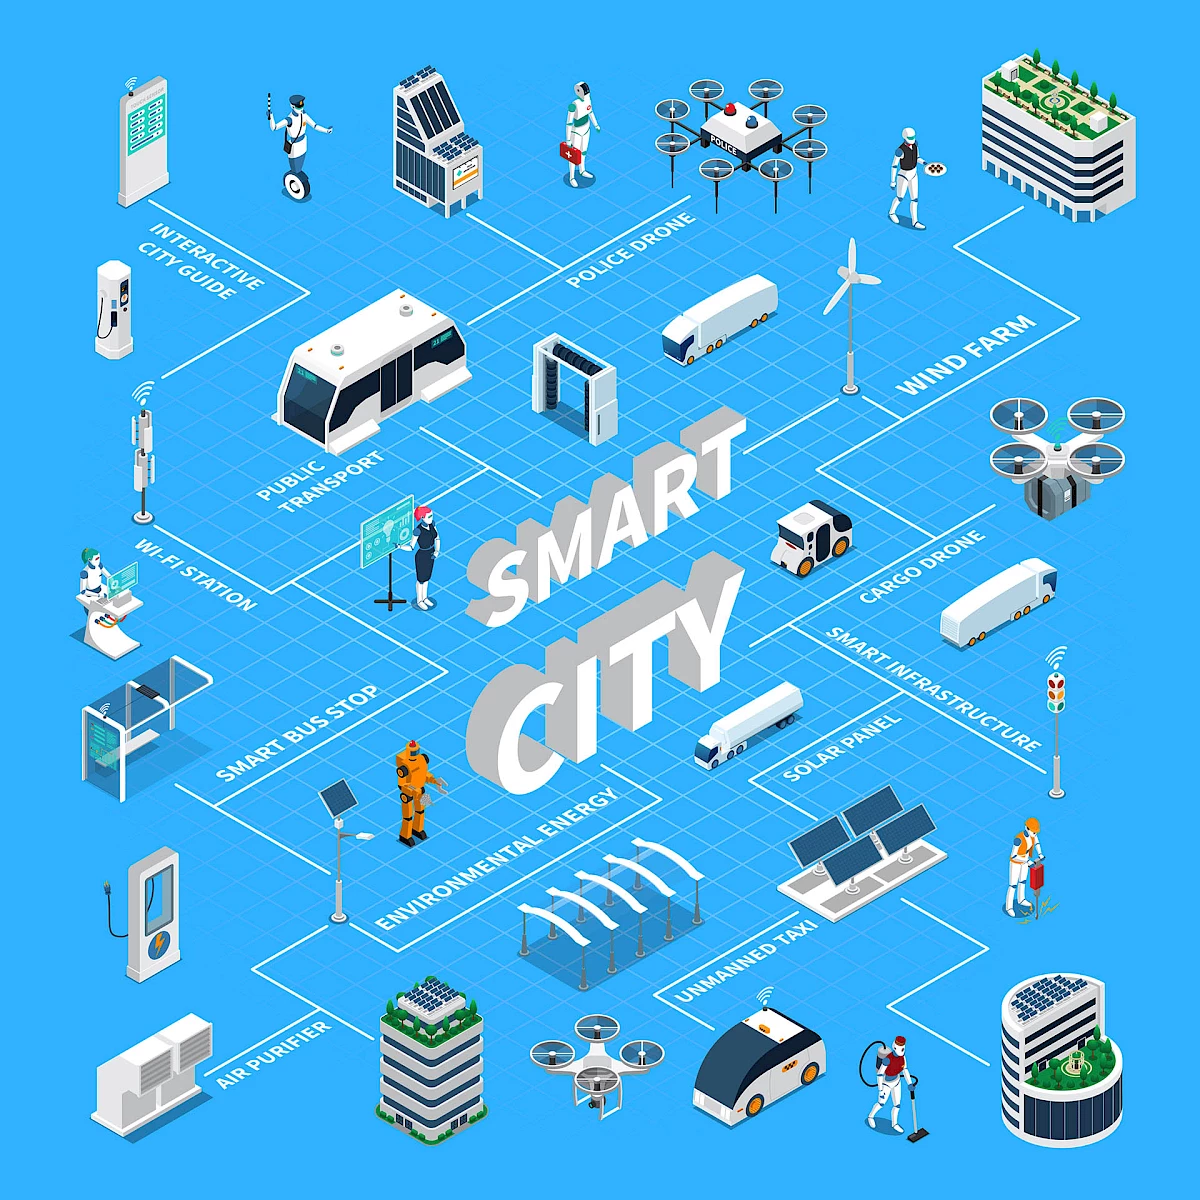 Smart City - Overview of the possibilities